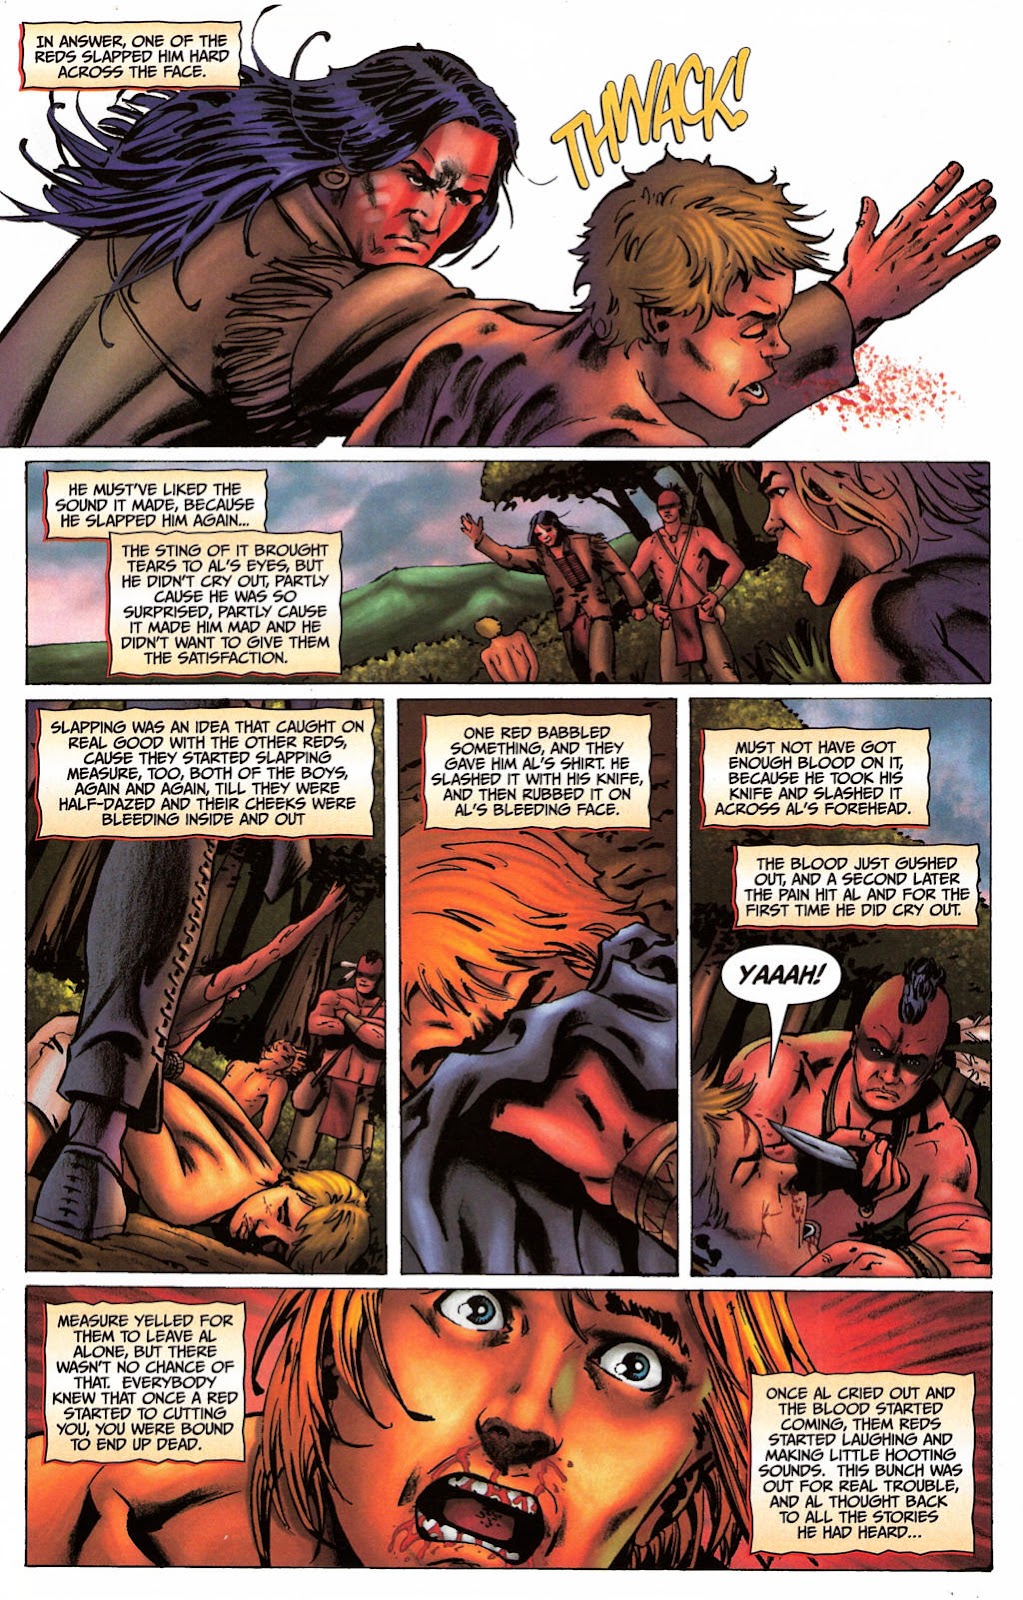 Red Prophet: The Tales of Alvin Maker issue 5 - Page 5